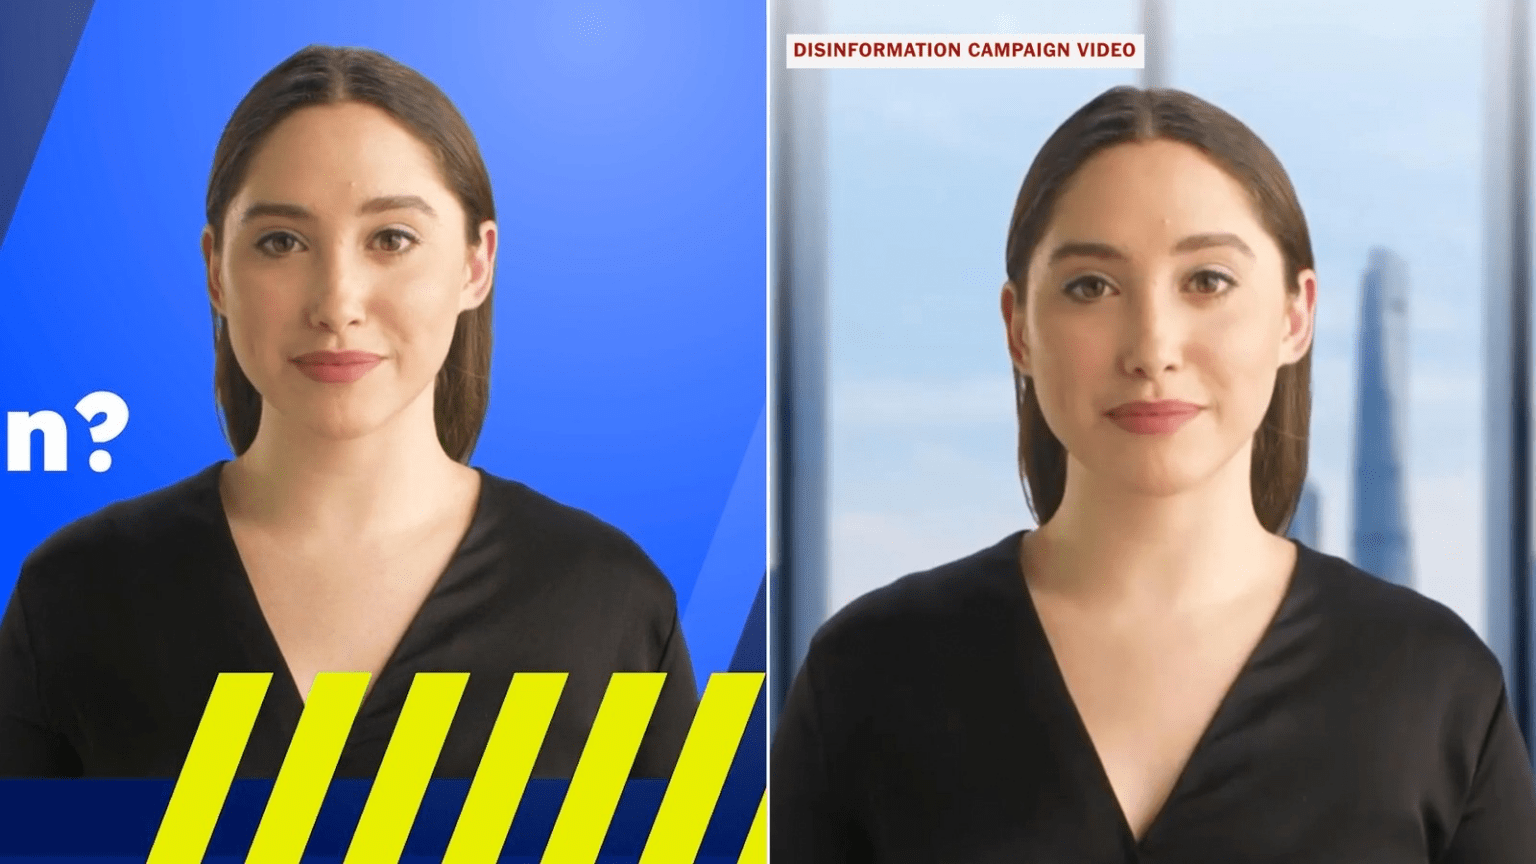 How To Protect Yourself From Deepnude Deepfake Threat